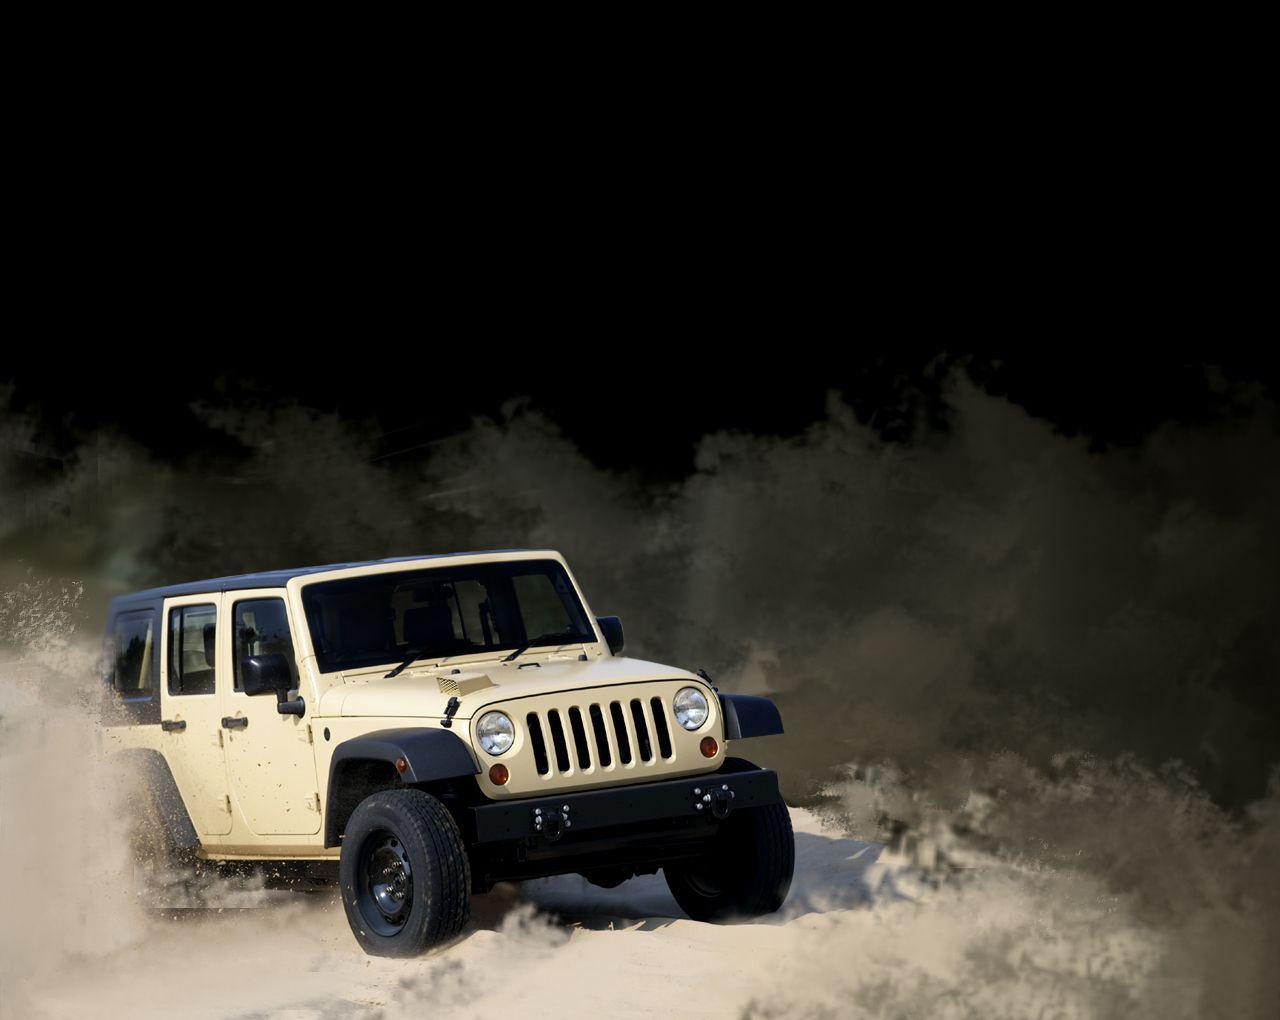 Jeep Wallpaper Backgrounds